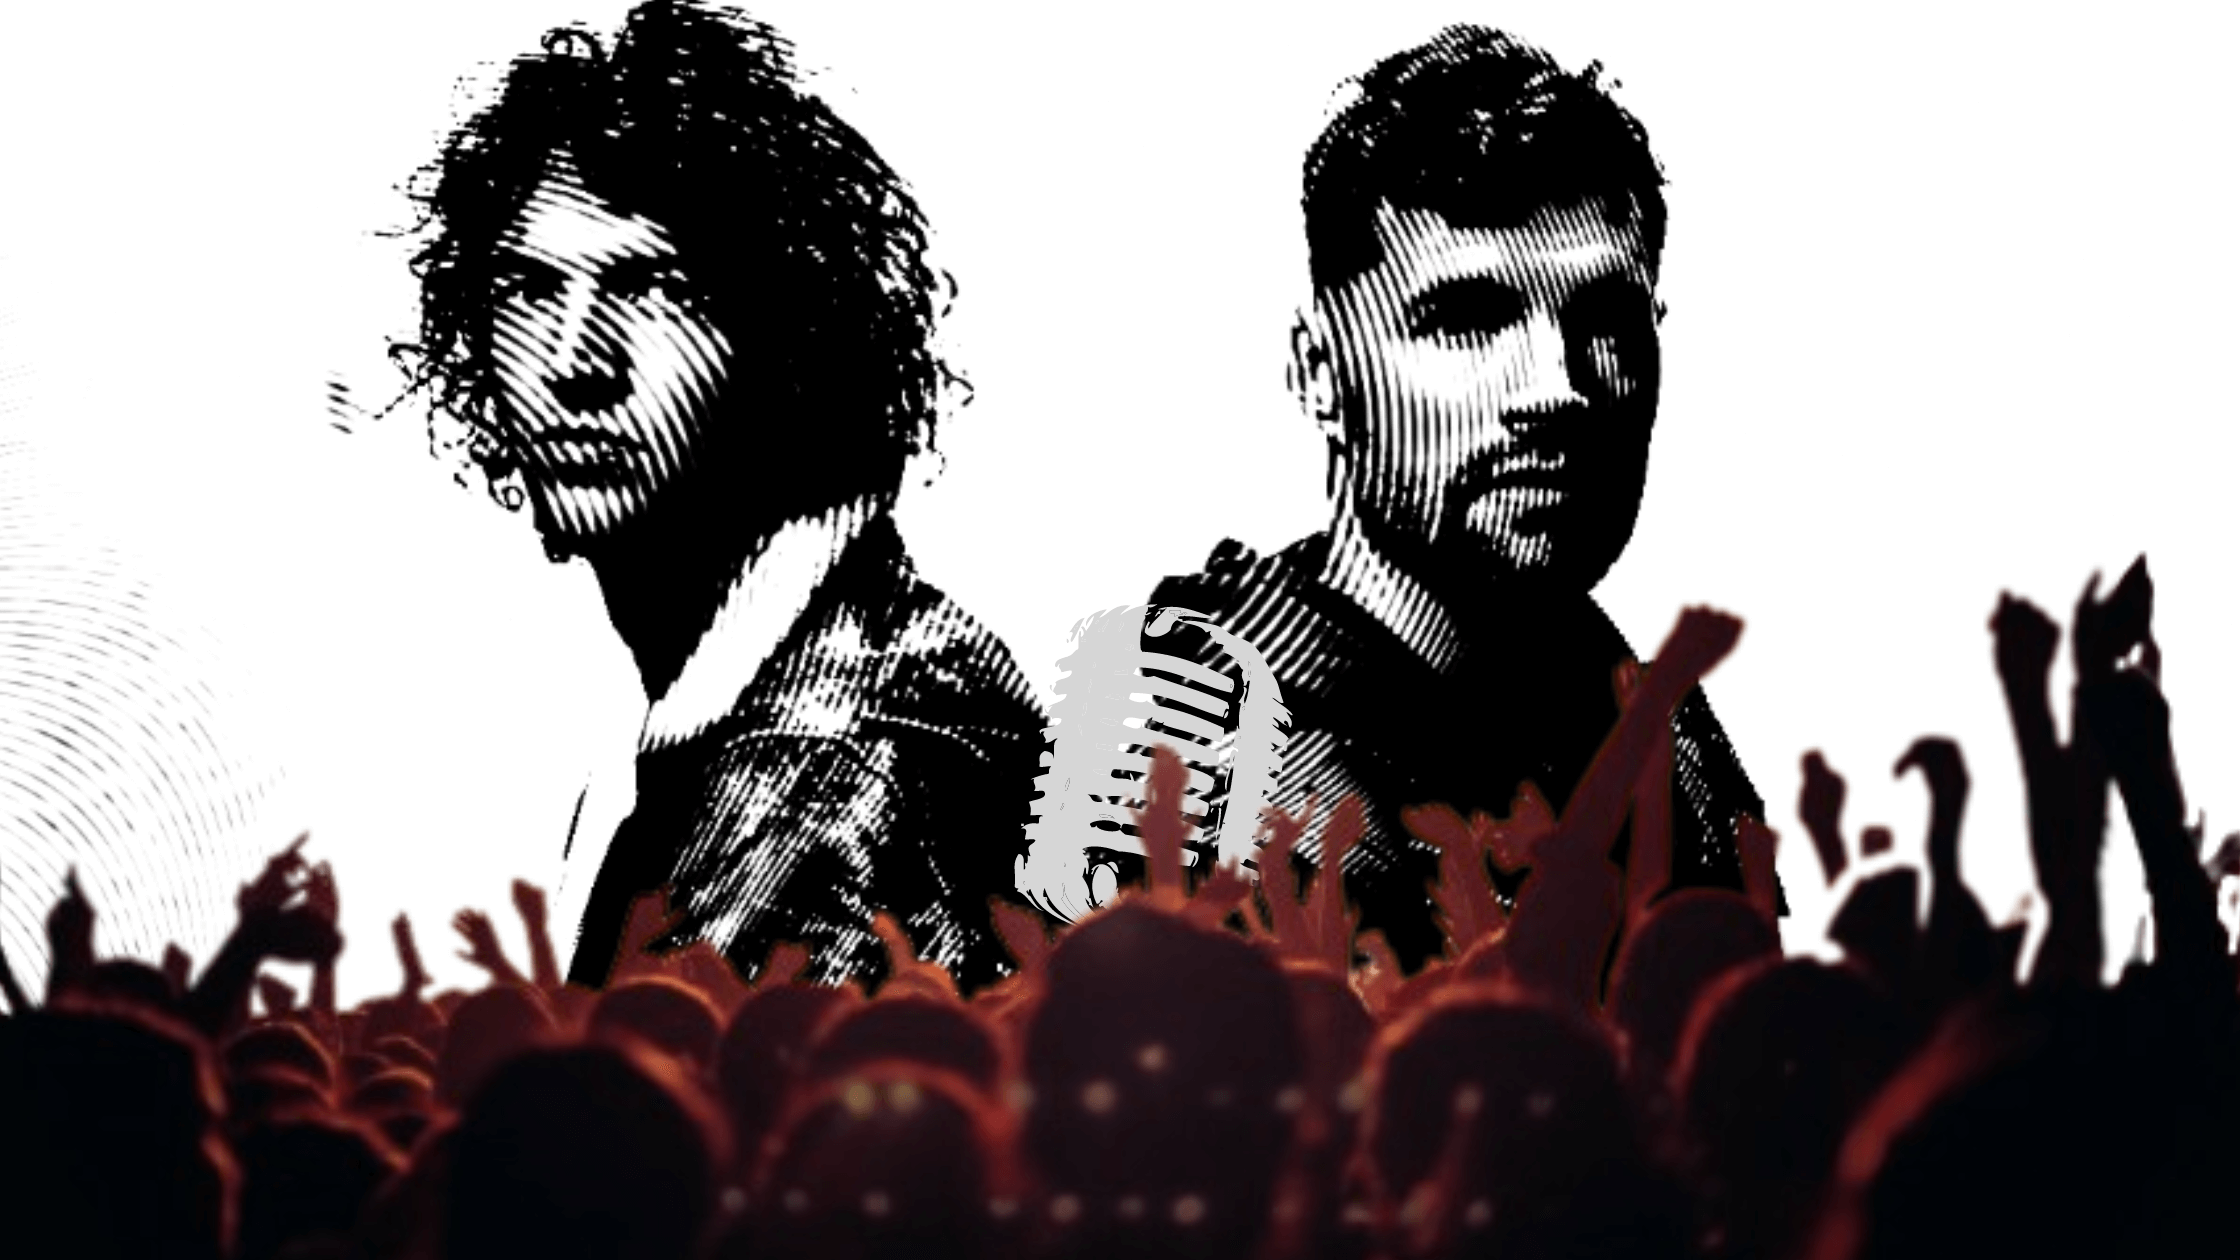 FOR KING & COUNTRY